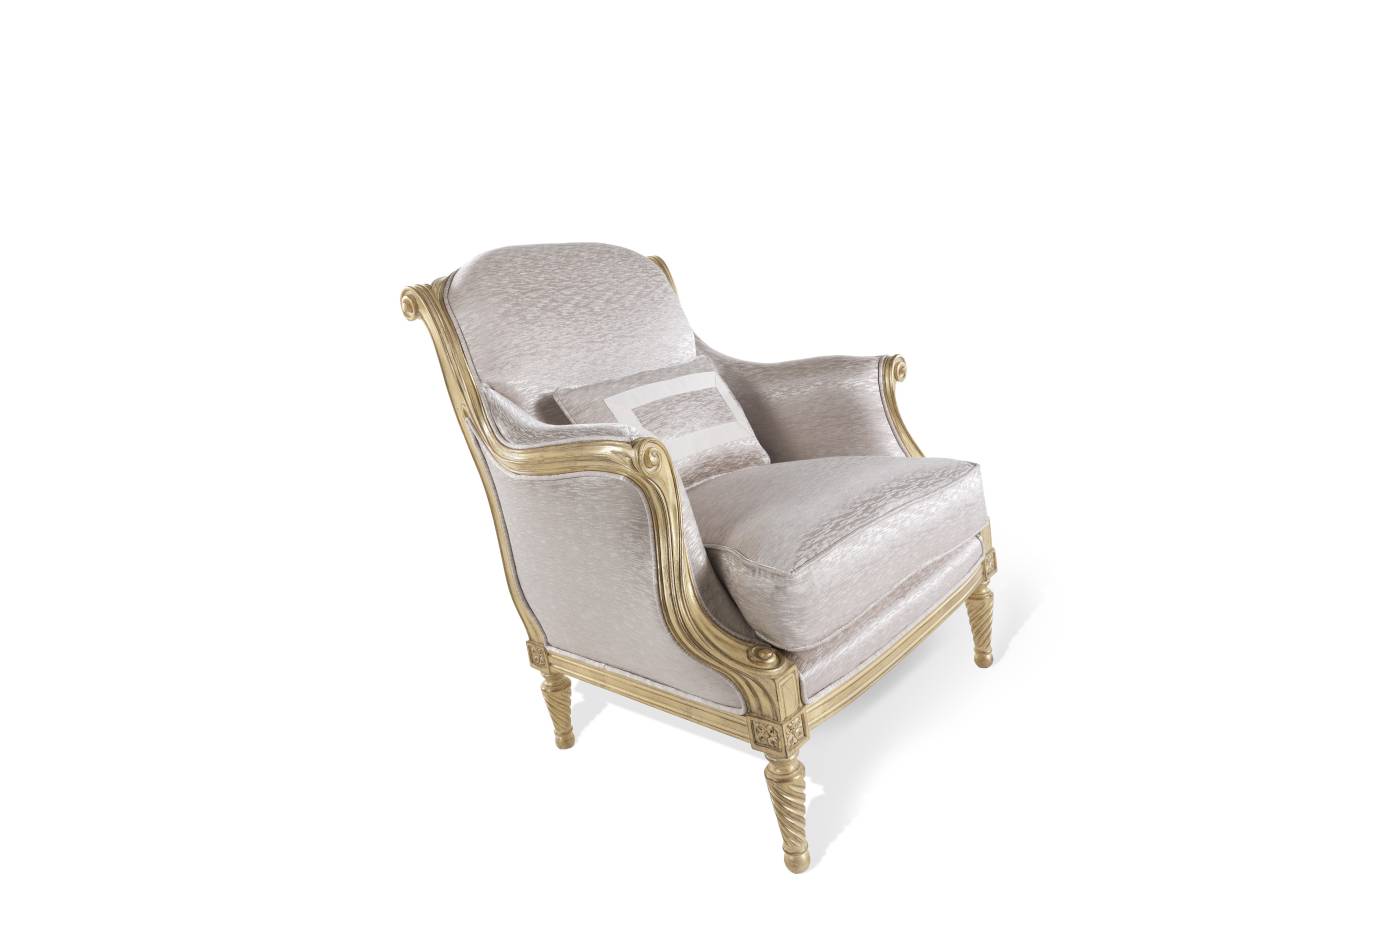 REBECCA armchair - convey elegance to each space with Italian classic armchairs of the classic Savoir-Faire collection